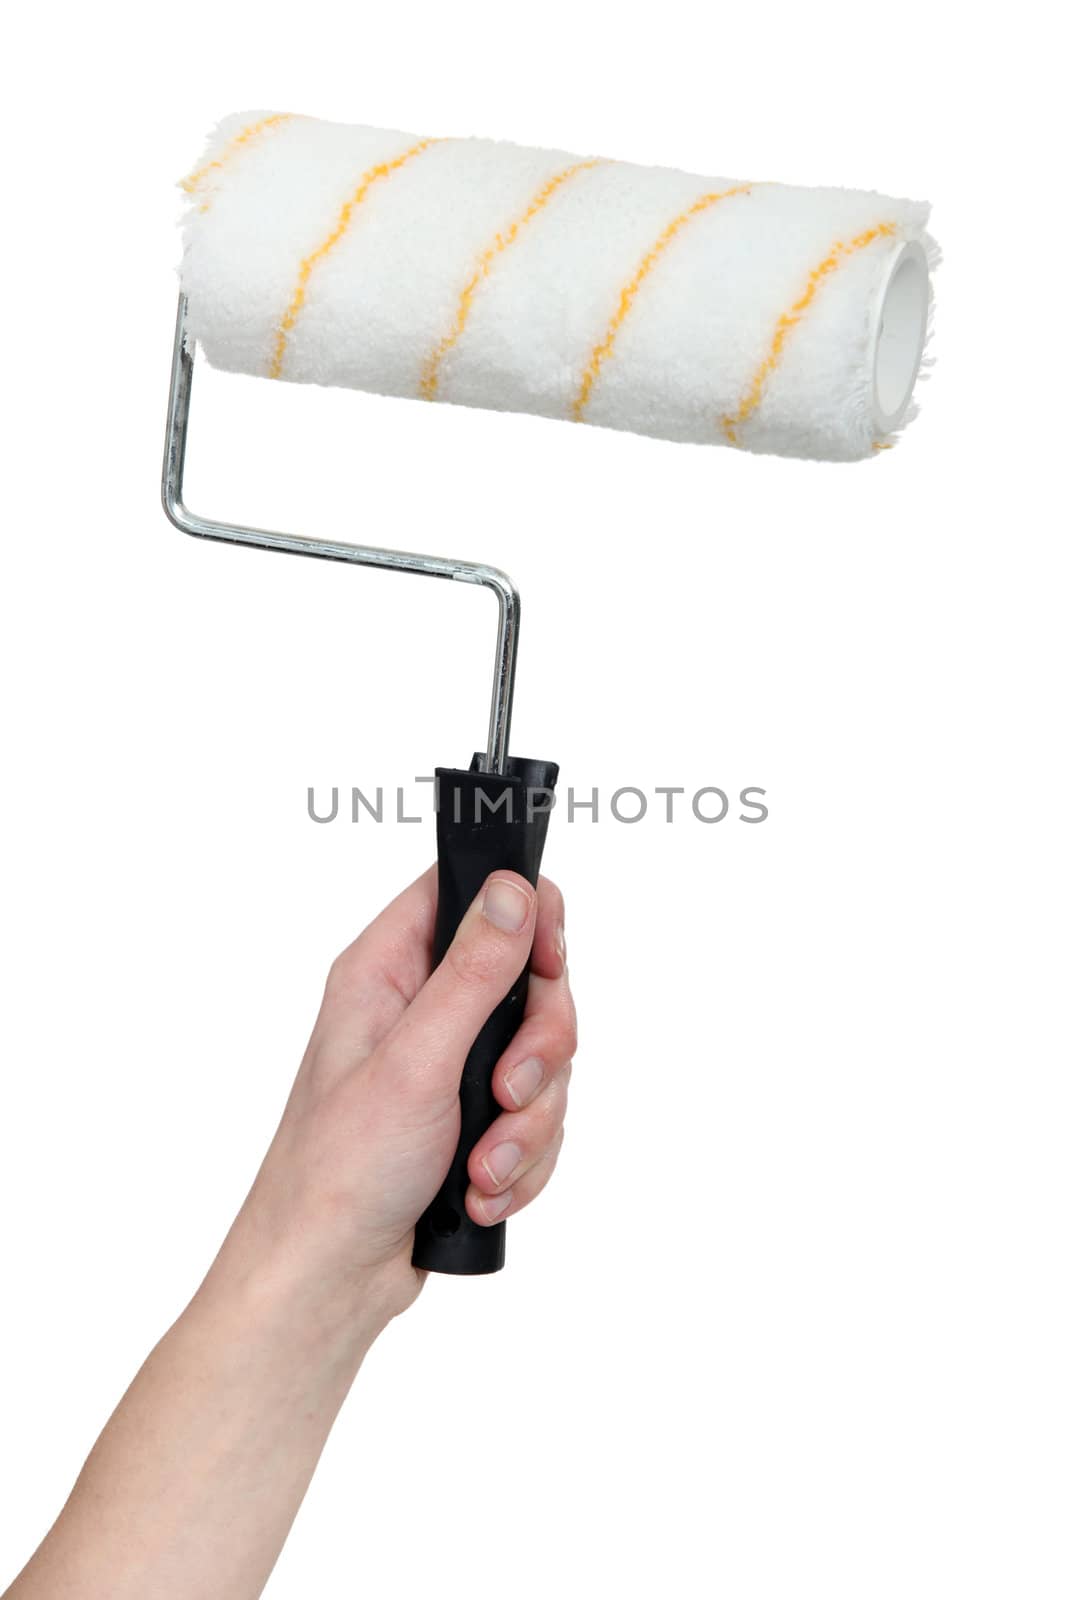 Paint roller by phovoir